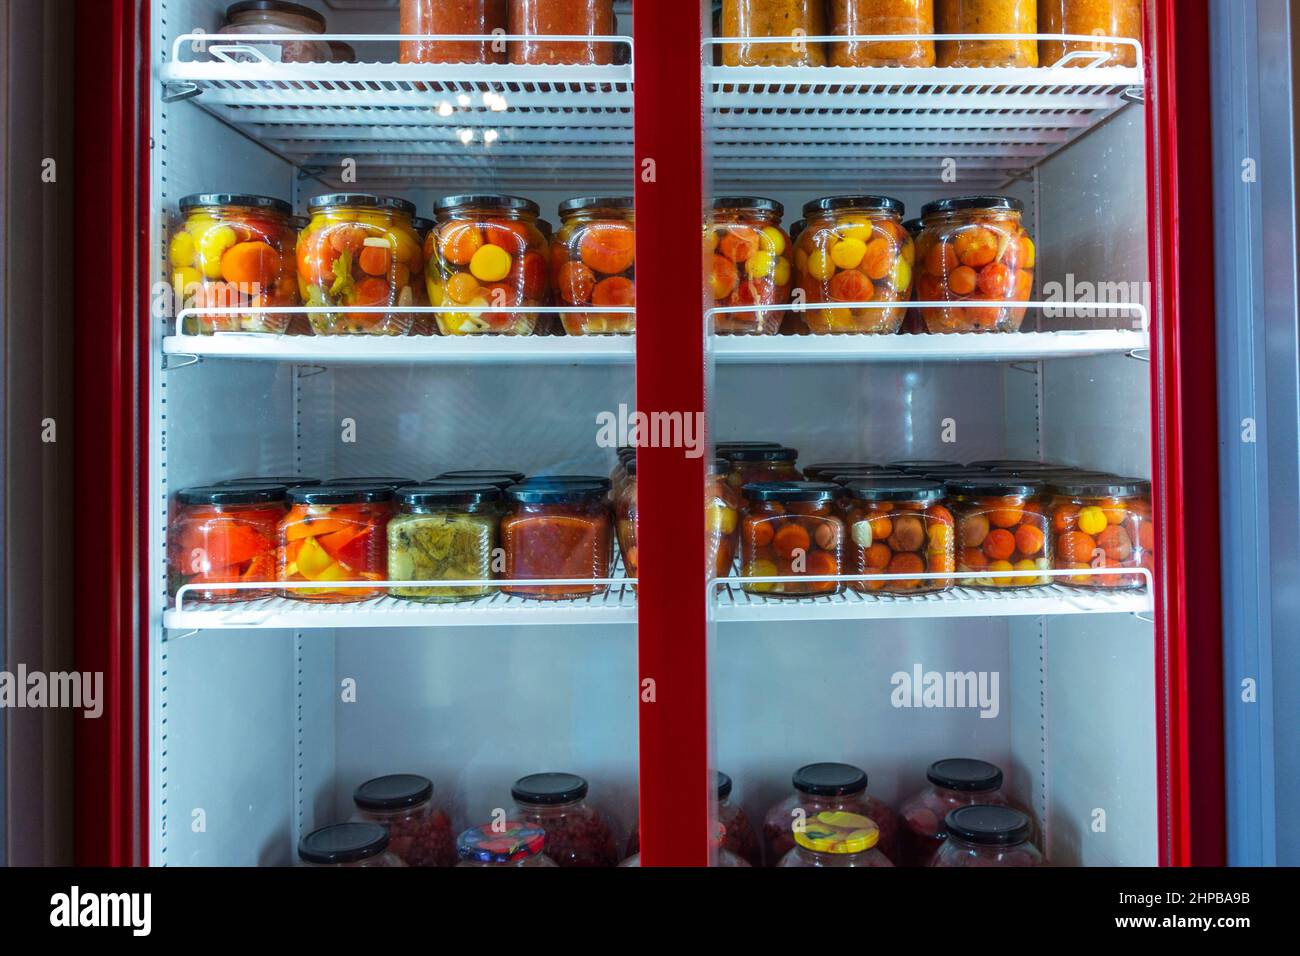 A refrigerated display case with cans of canned home products, a refrigerator with canned fruits and vegetables. Food storage. Stock Photo